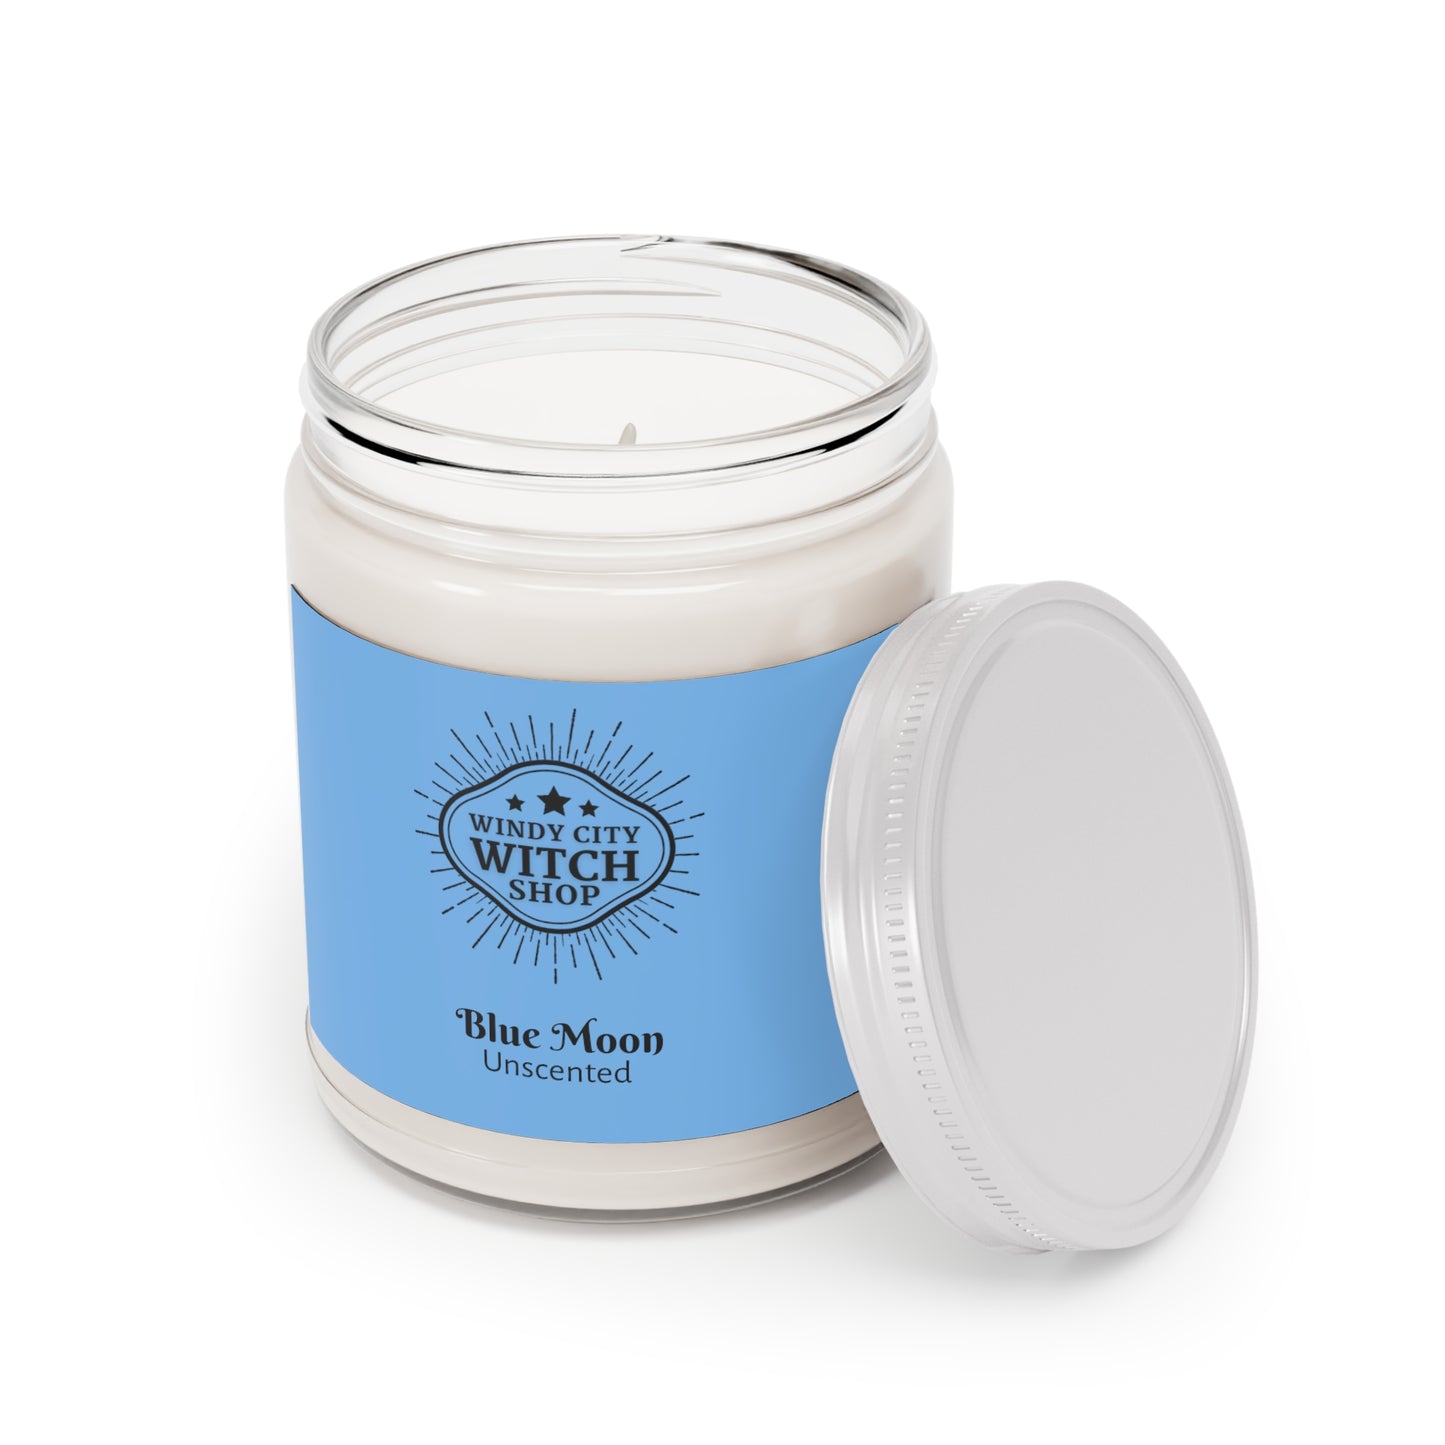 Blue Moon candle, unscented